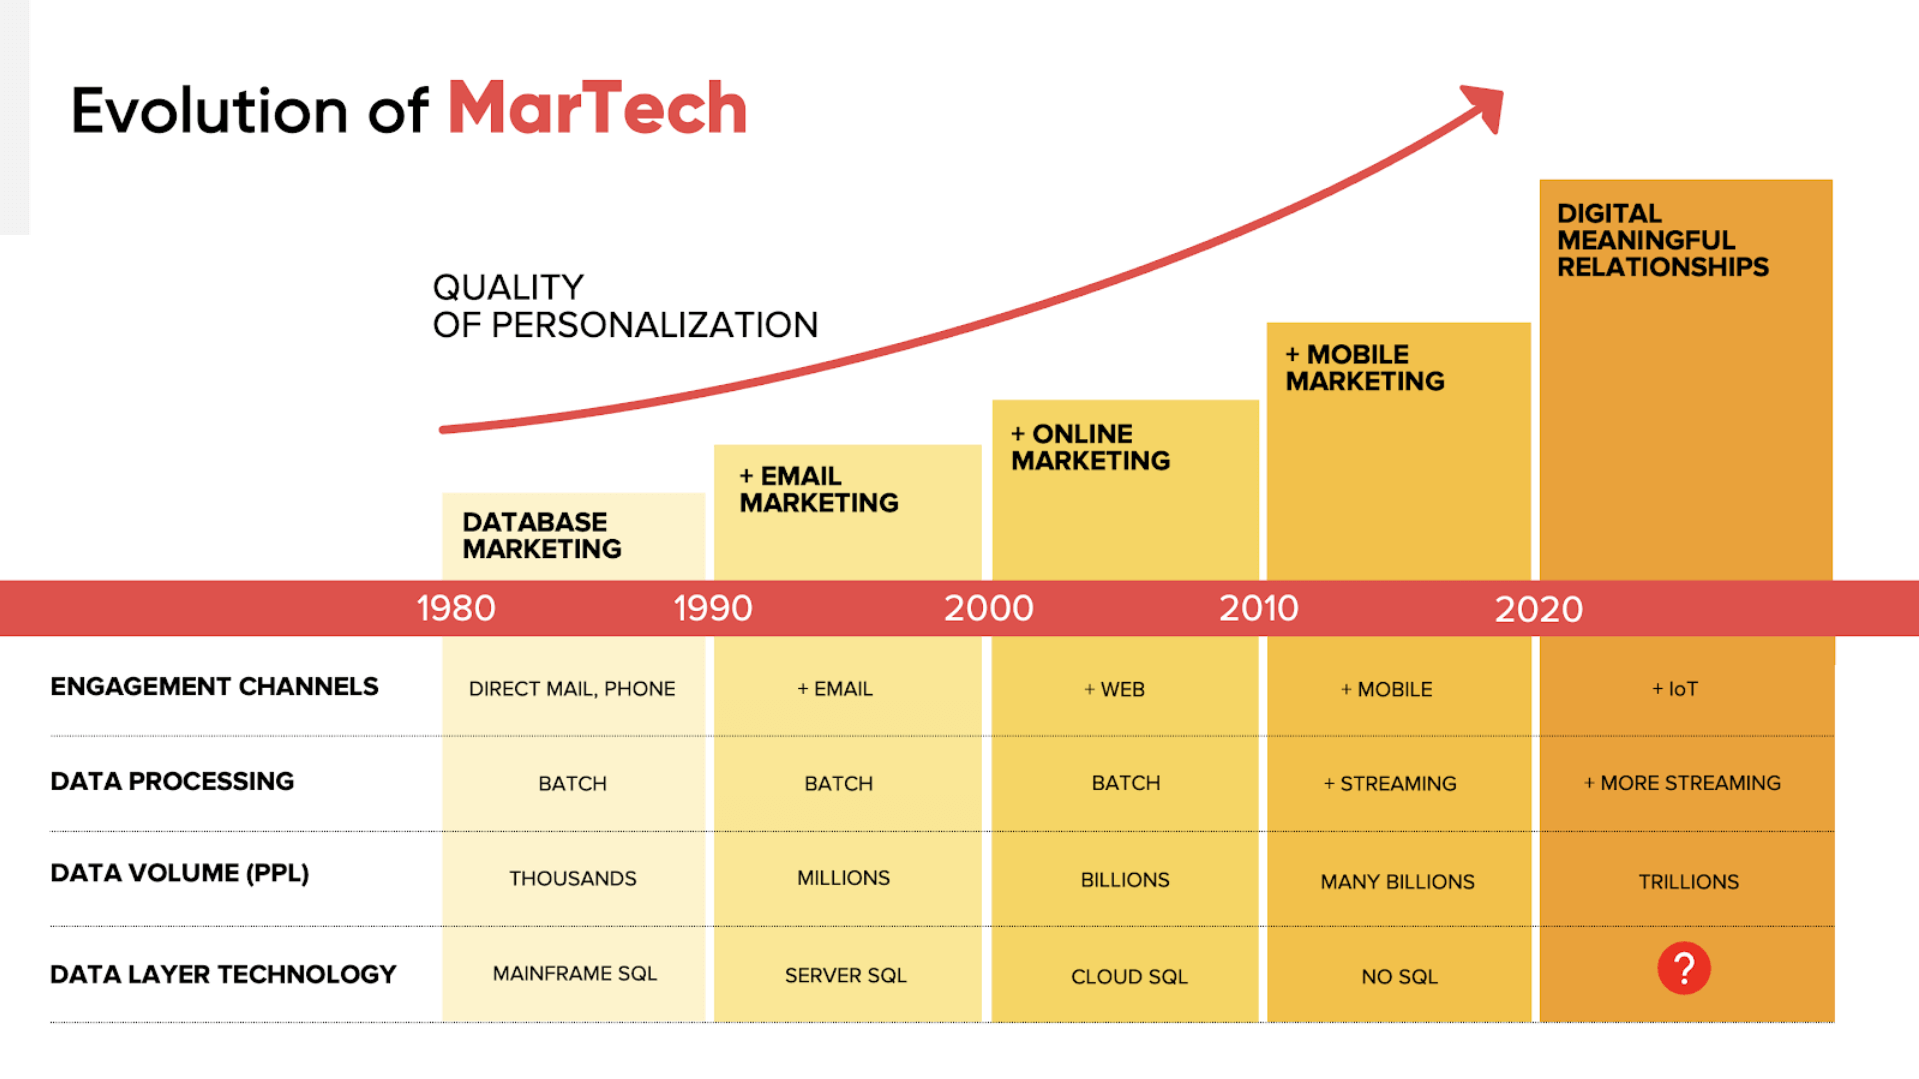 Illustration showing the evolution of martech functionalities and features